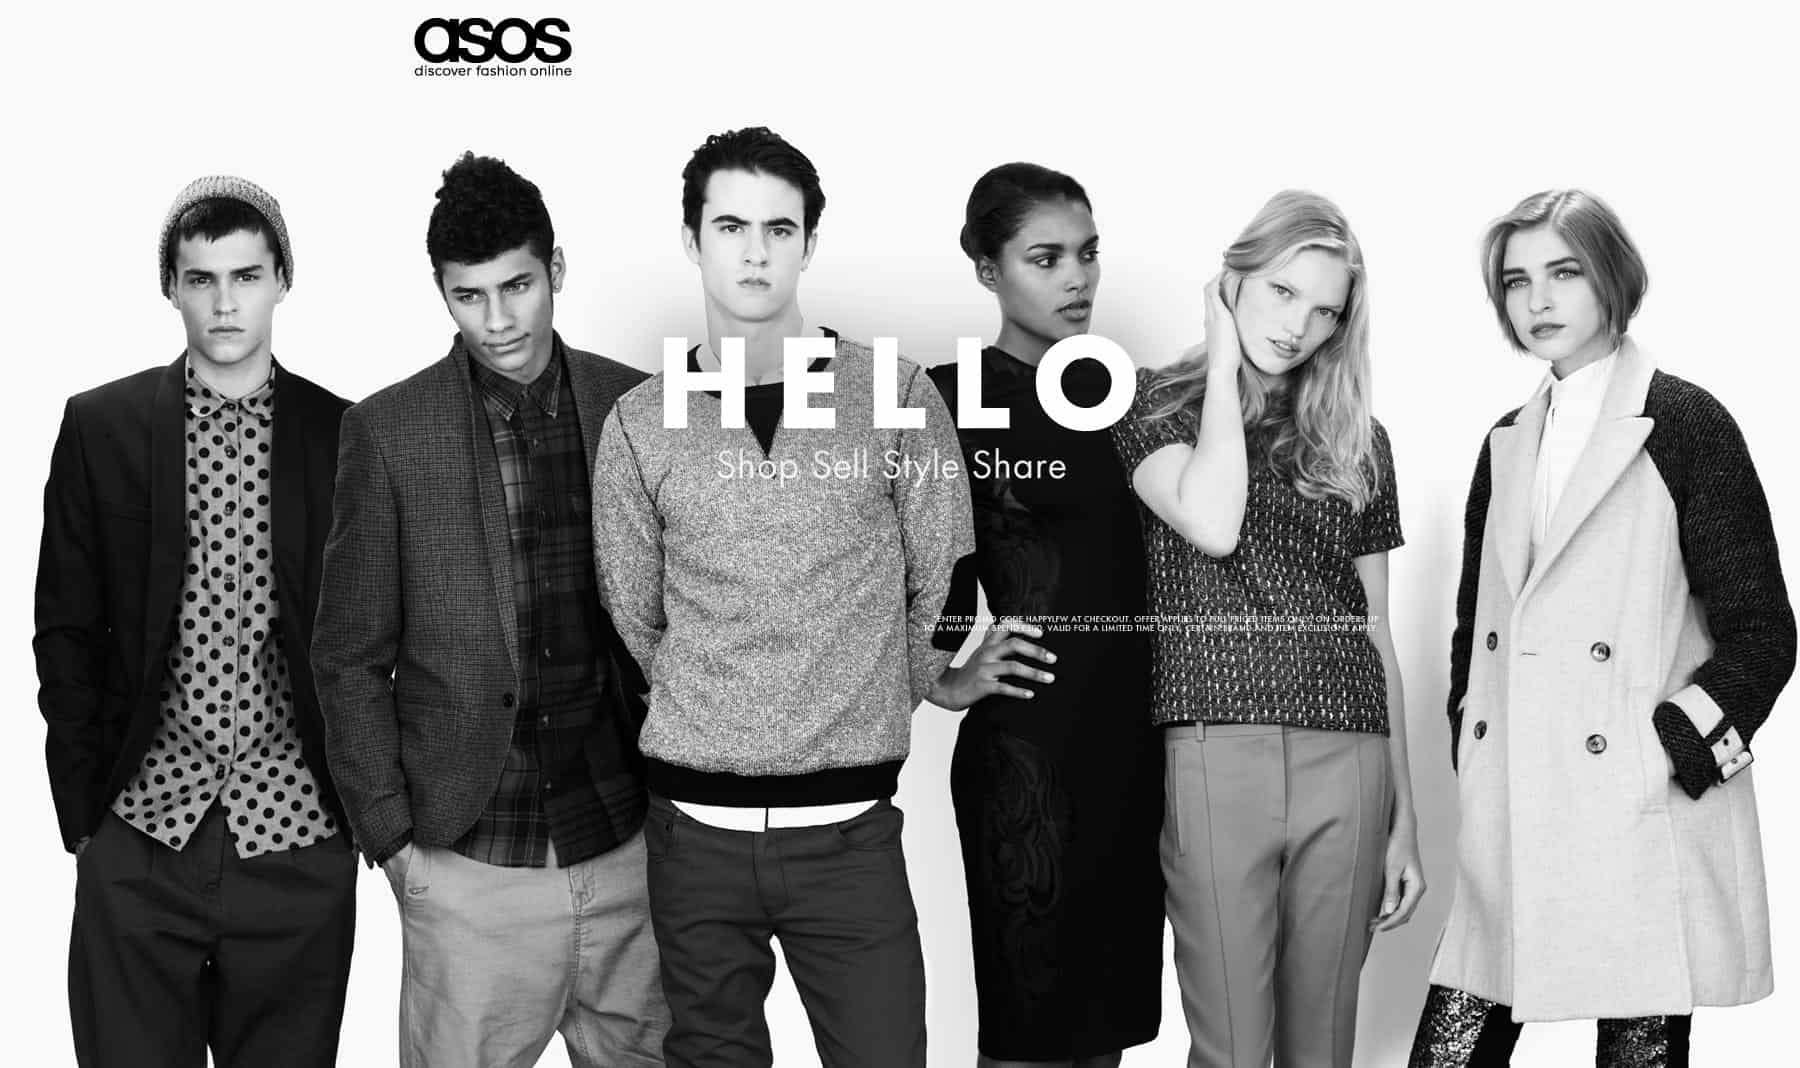 Oracle to support ASOS global expansion